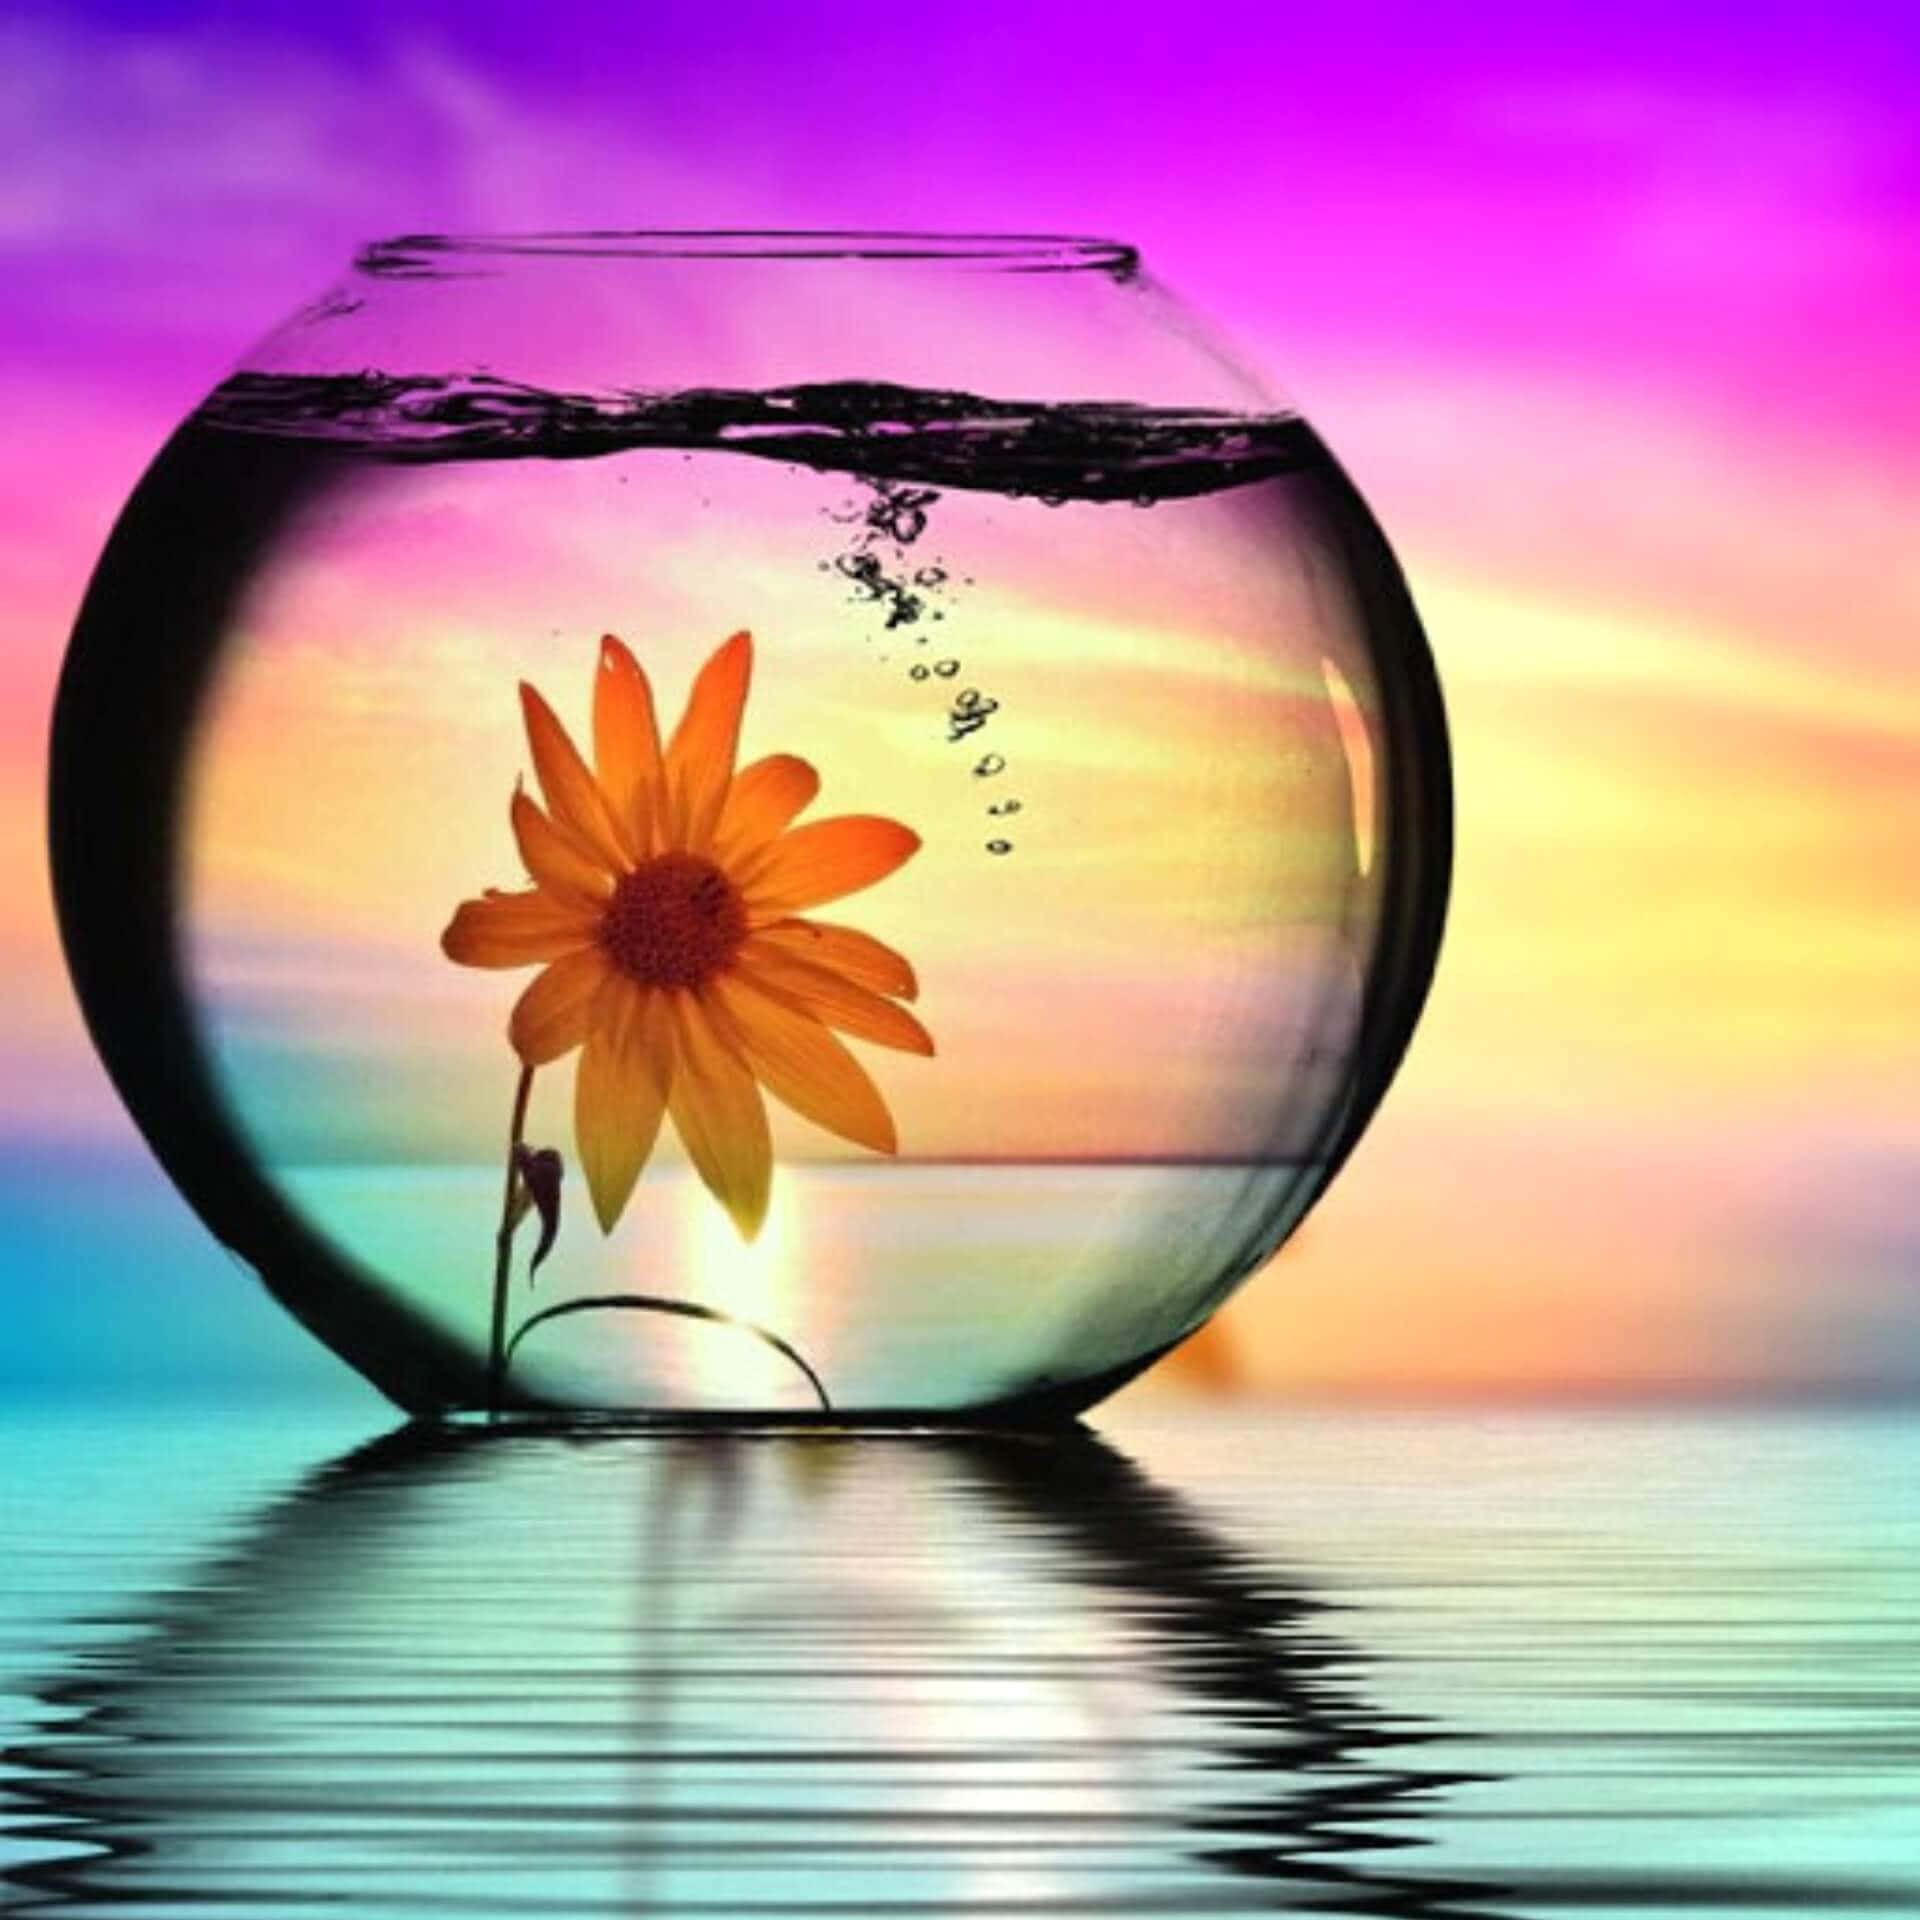 A Fish Bowl With A Flower Inside It